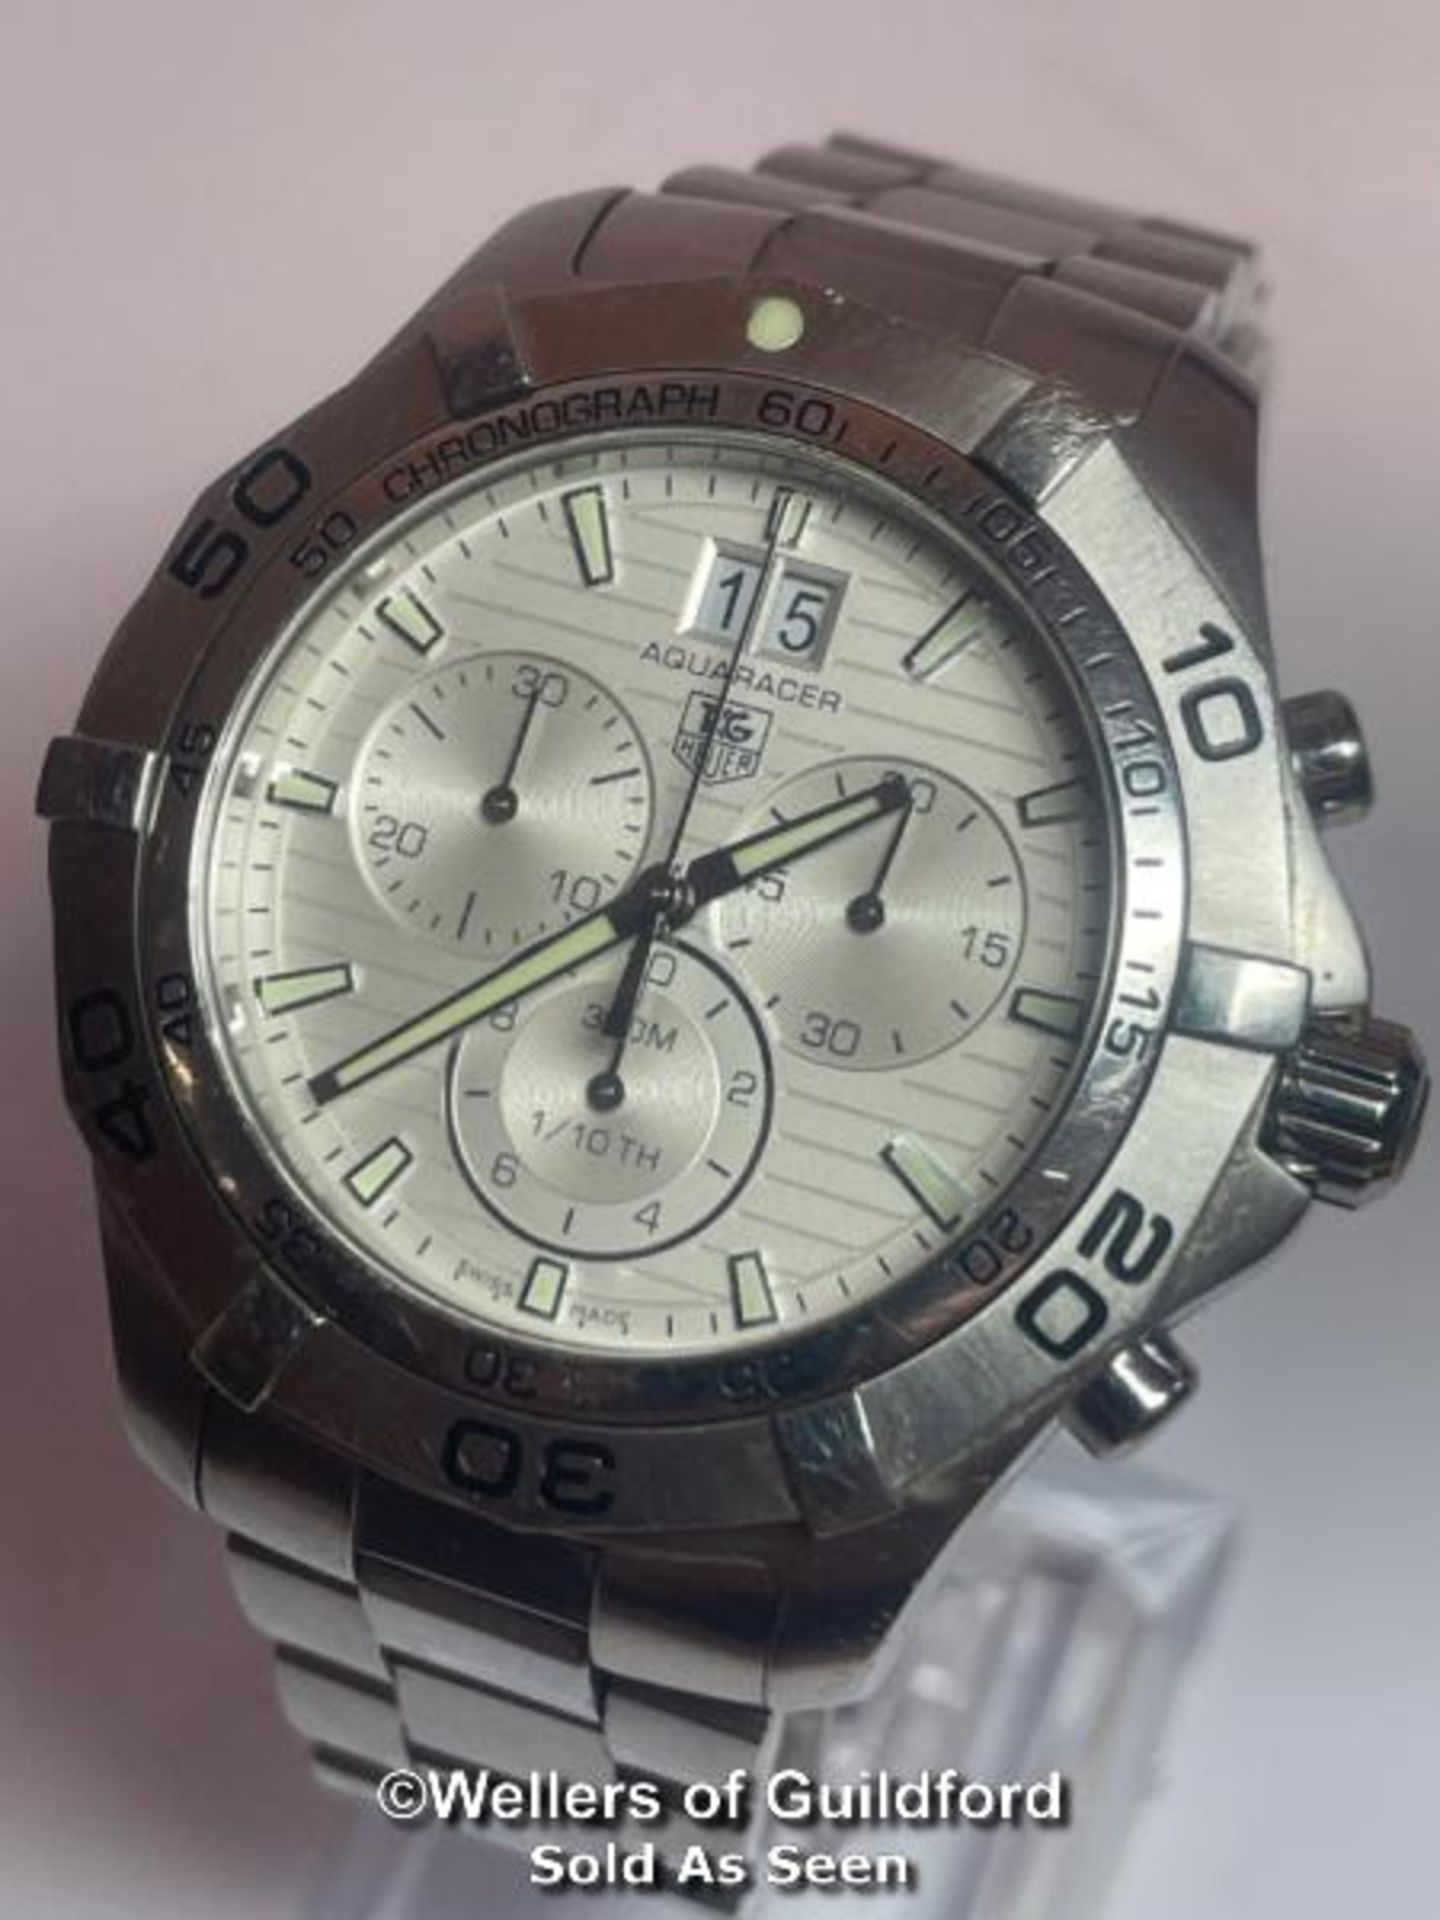 Tag Heuer aqua racer stainless steel wristwatch no. CAF101F, 3.3cm dial, good cosmetic condition - Bild 2 aus 20